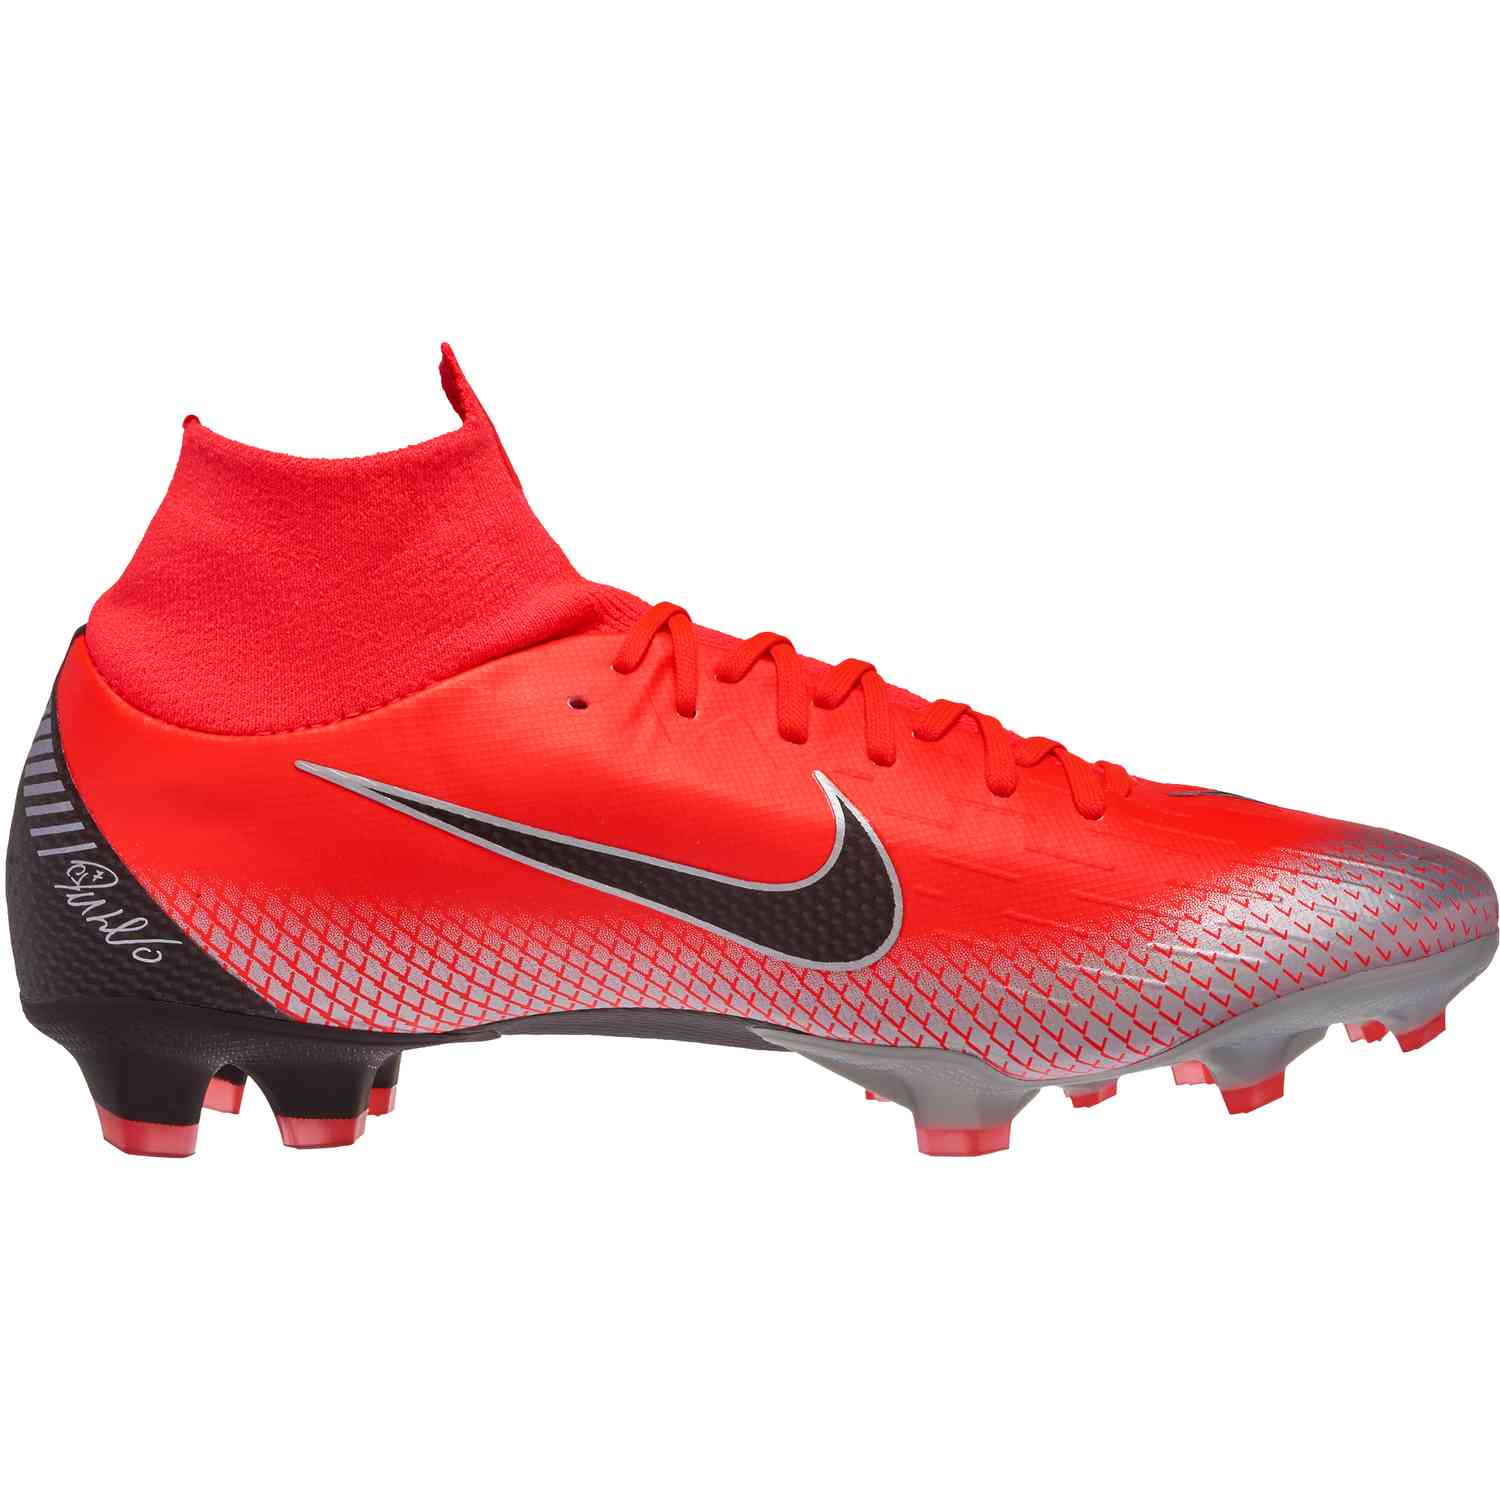 Nike CR7 Superfly 6 Pro - The Final 